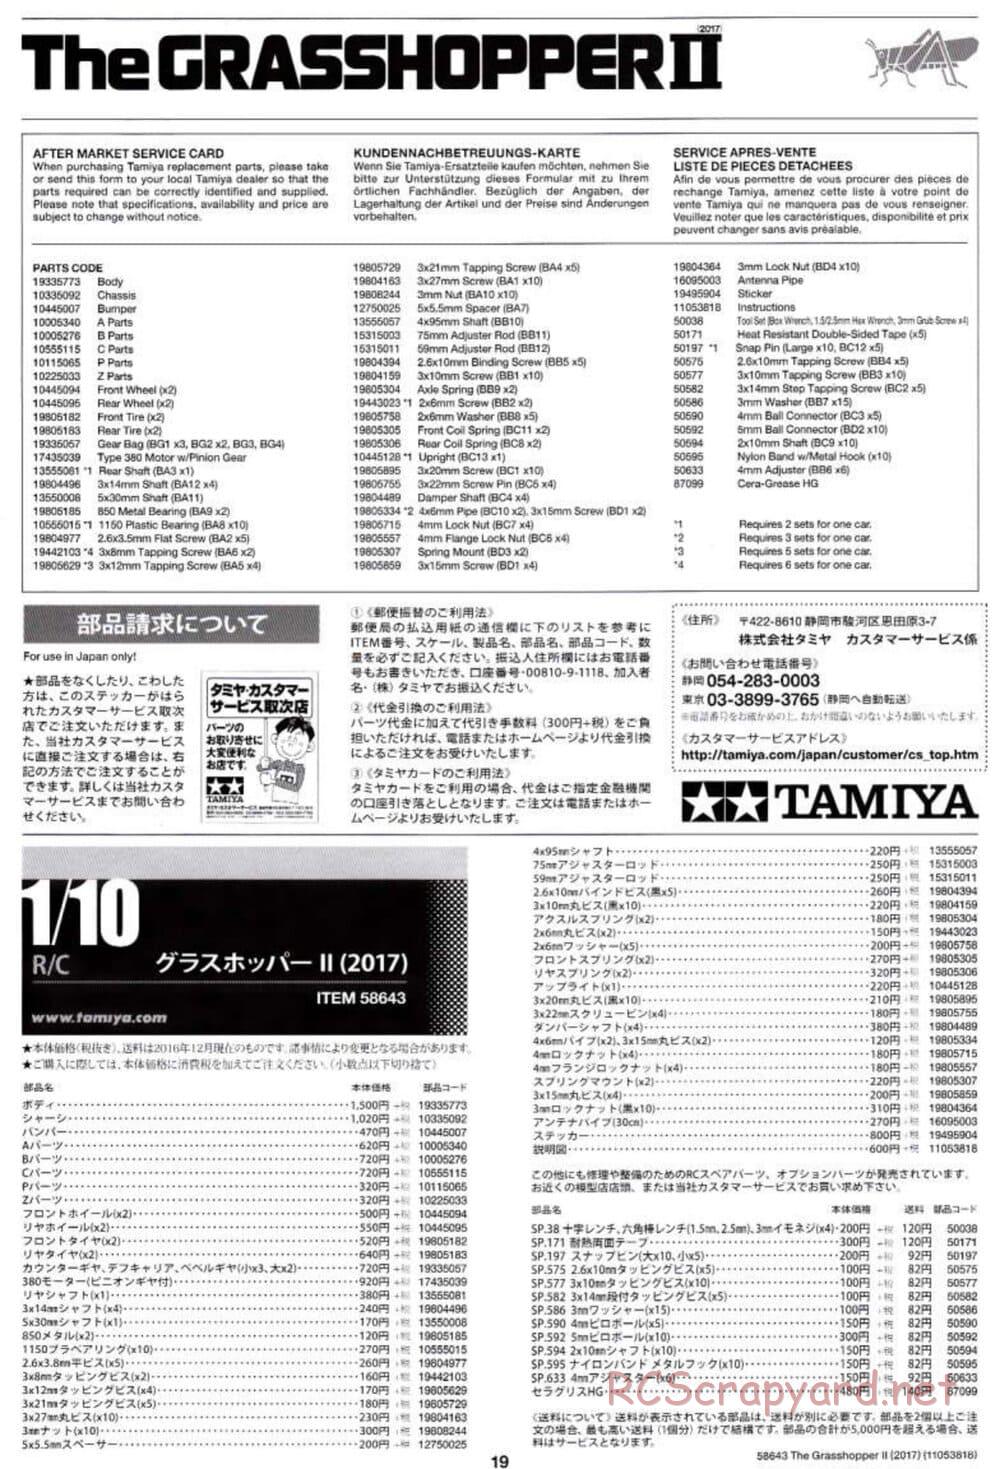 Tamiya - The Grasshopper II (2017) - GH Chassis - Manual - Page 19